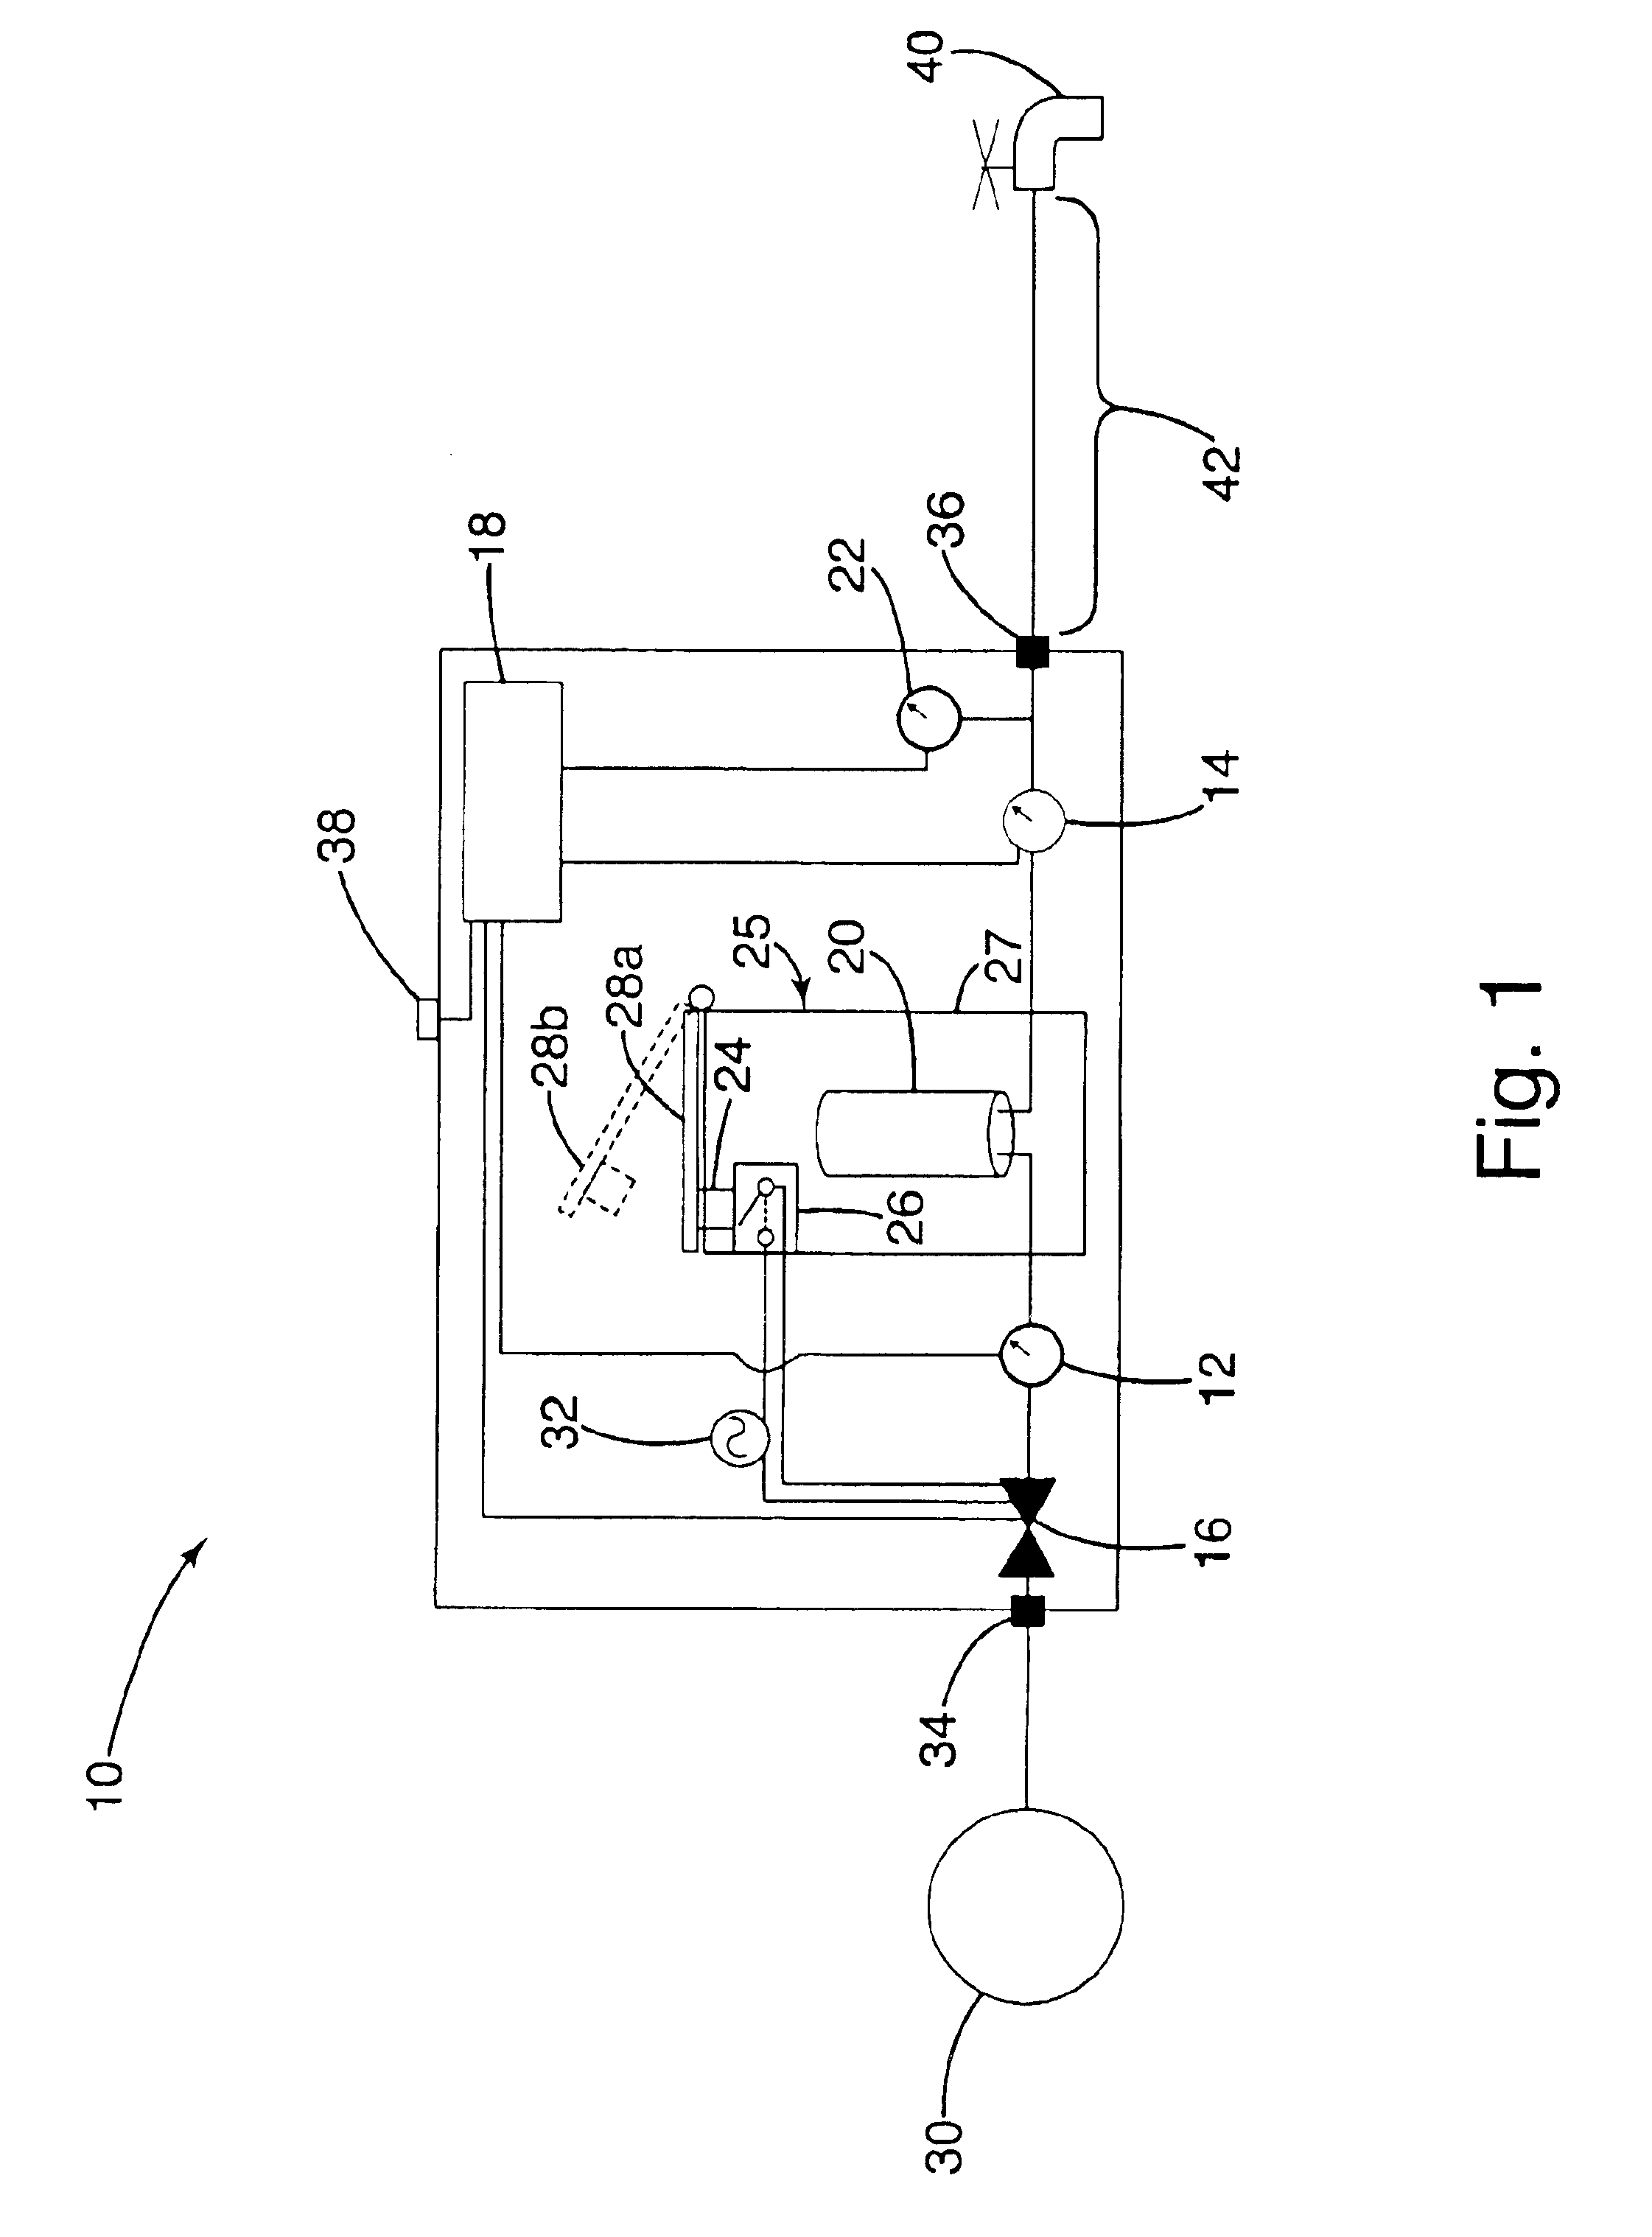 Automatic shut-off for water treatment system